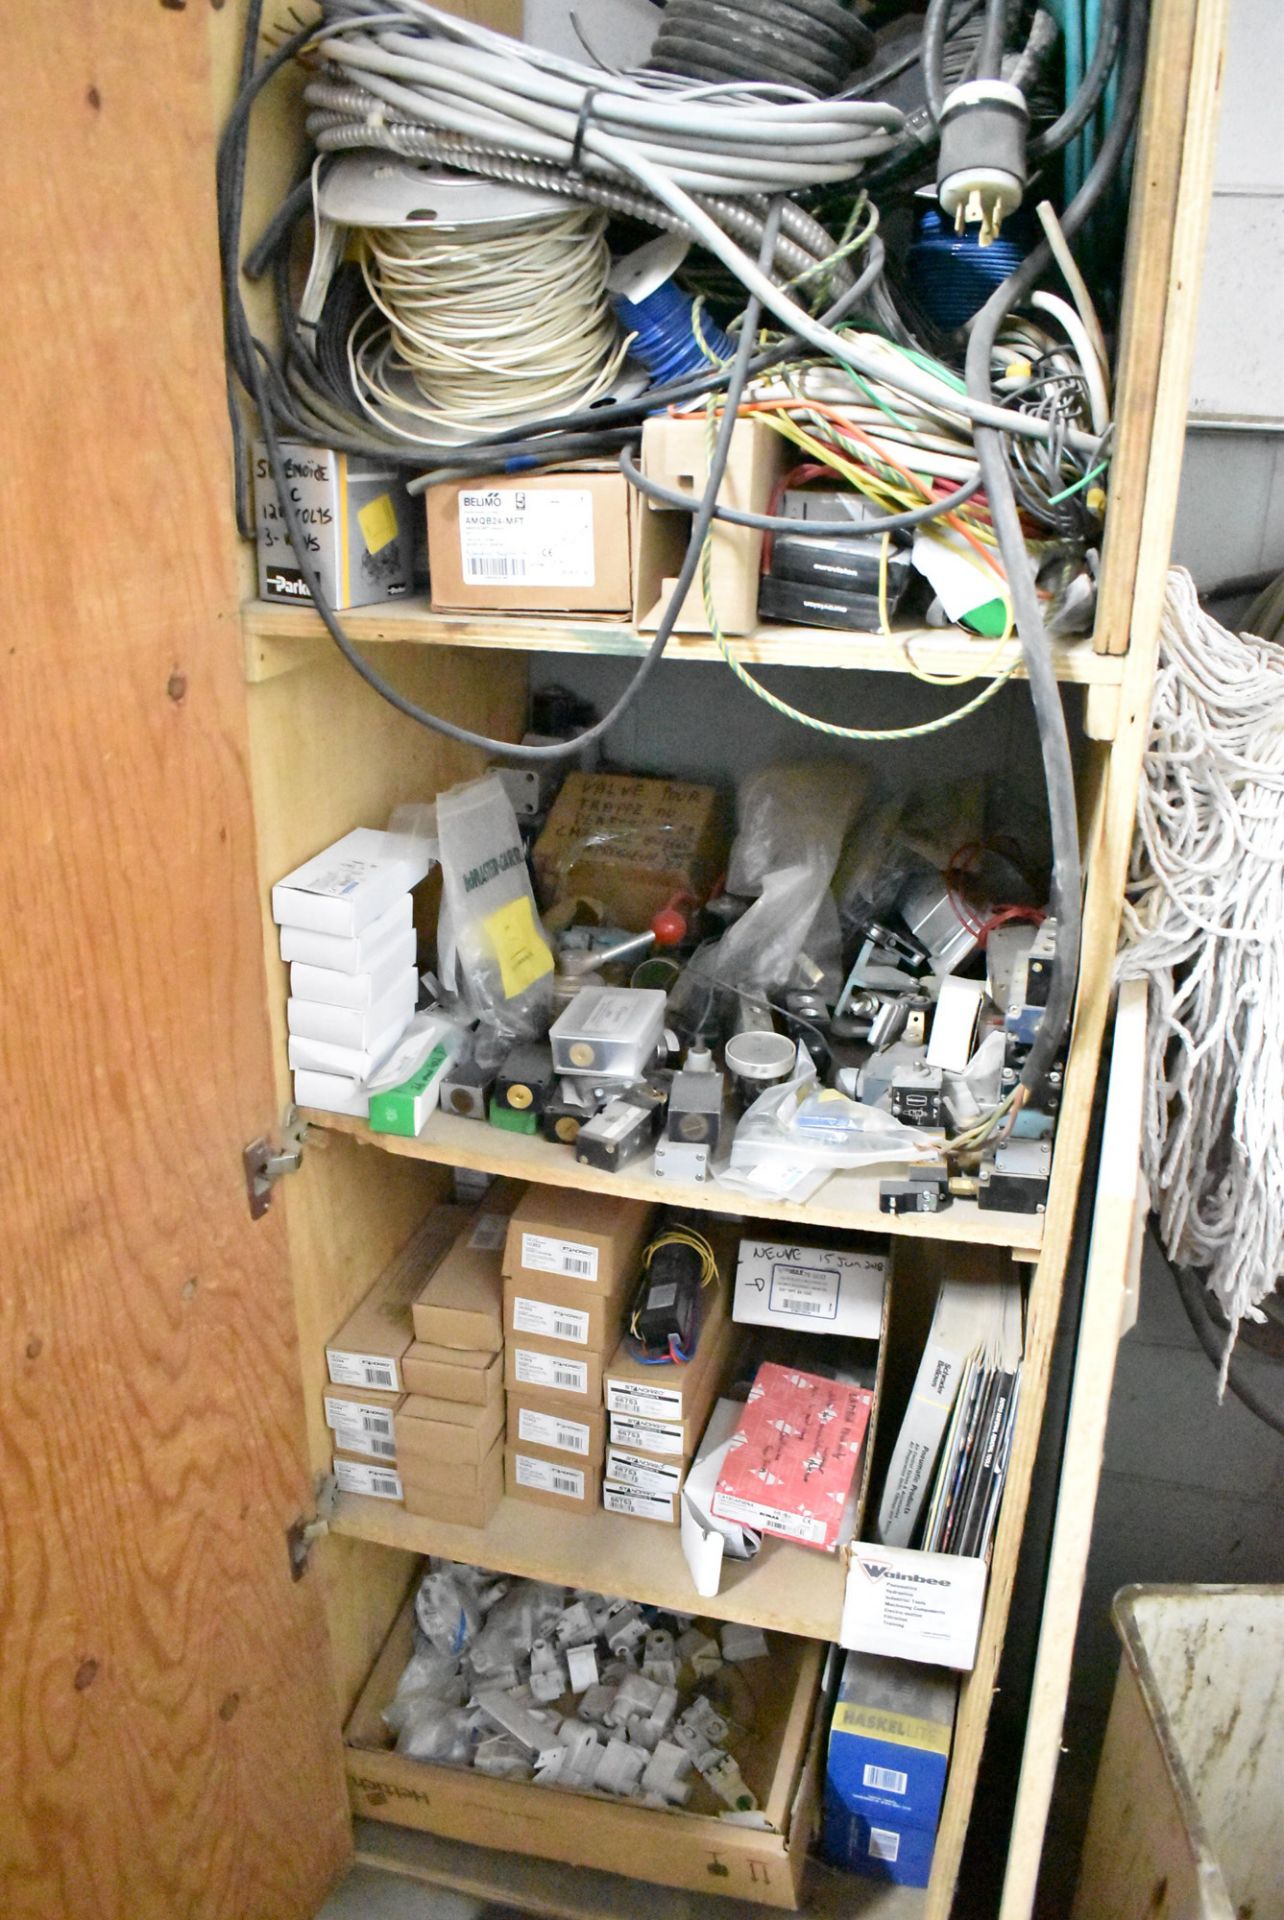 LOT/ STORAGE CABINETS WITH CONTENTS - SHOP SUPPLIES, CHEMICALS, HARDWARE, ELECTRICAL COMPONENTS, - Image 7 of 7